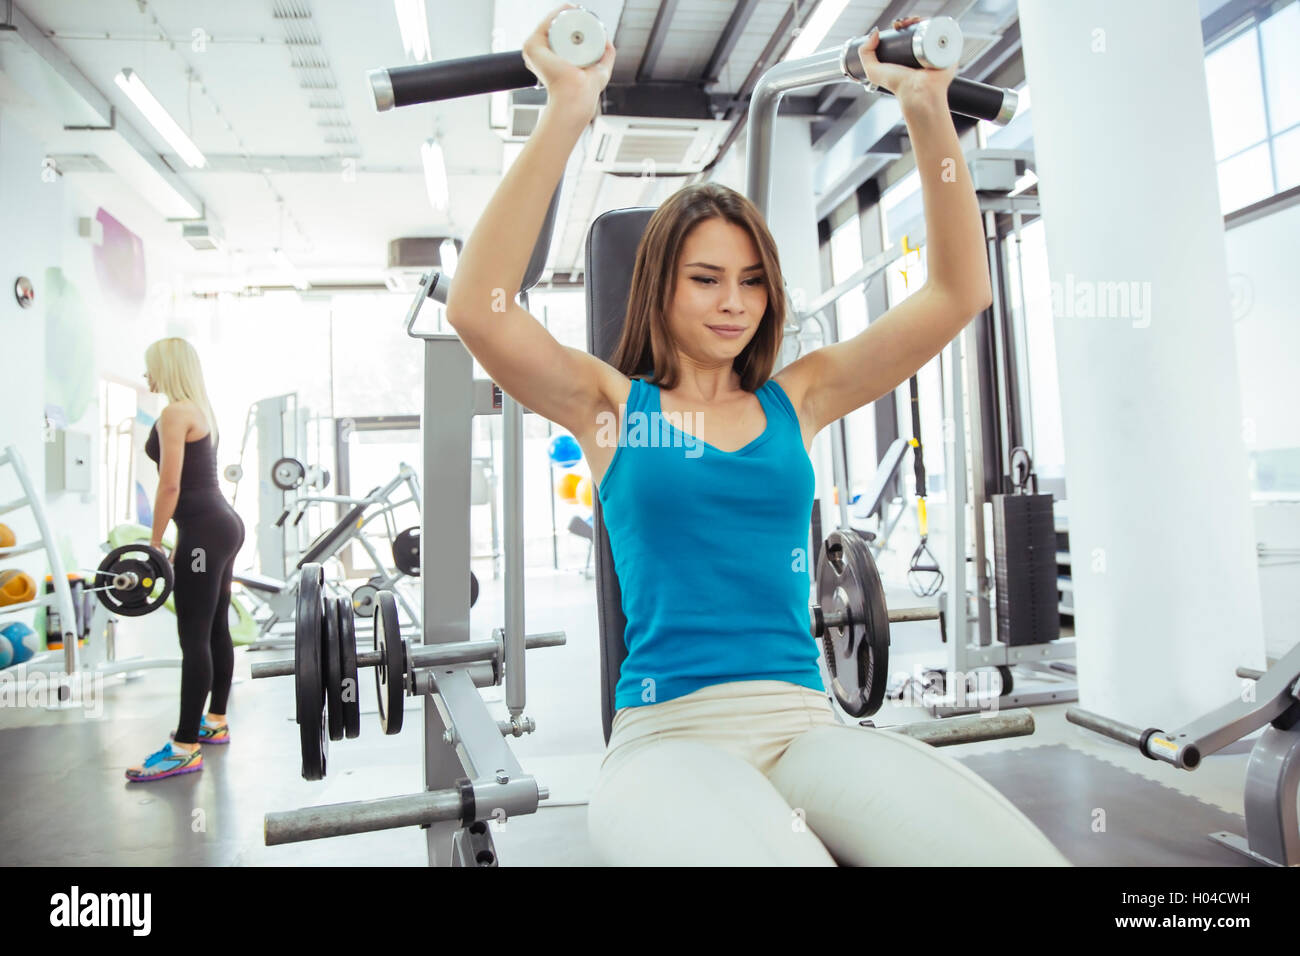 Beautiful woman training in gym and keeping body in shape Stock Photo